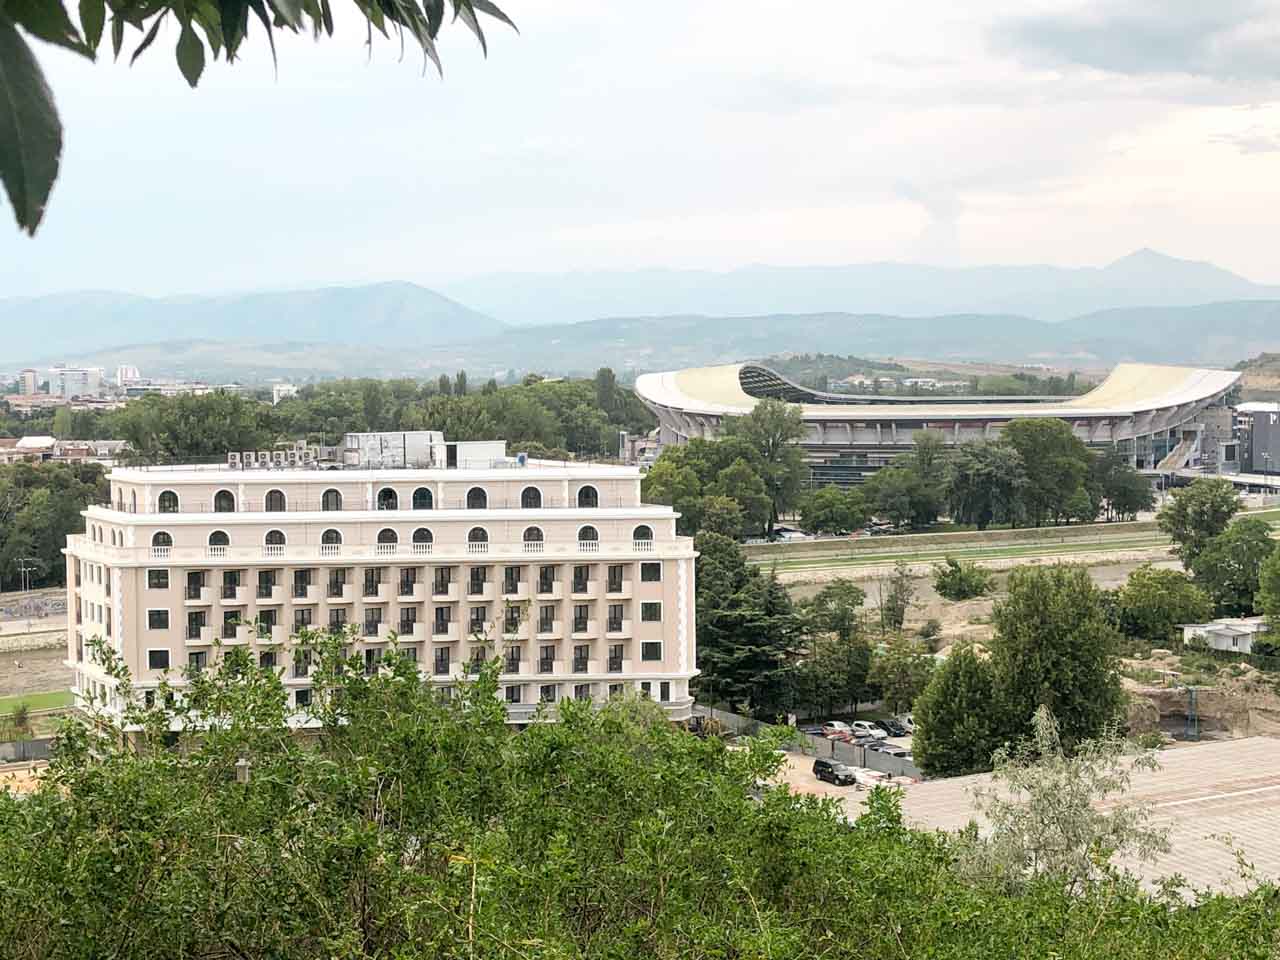 National Arena Toše Proeski seen from the top of the Skopje Fortress